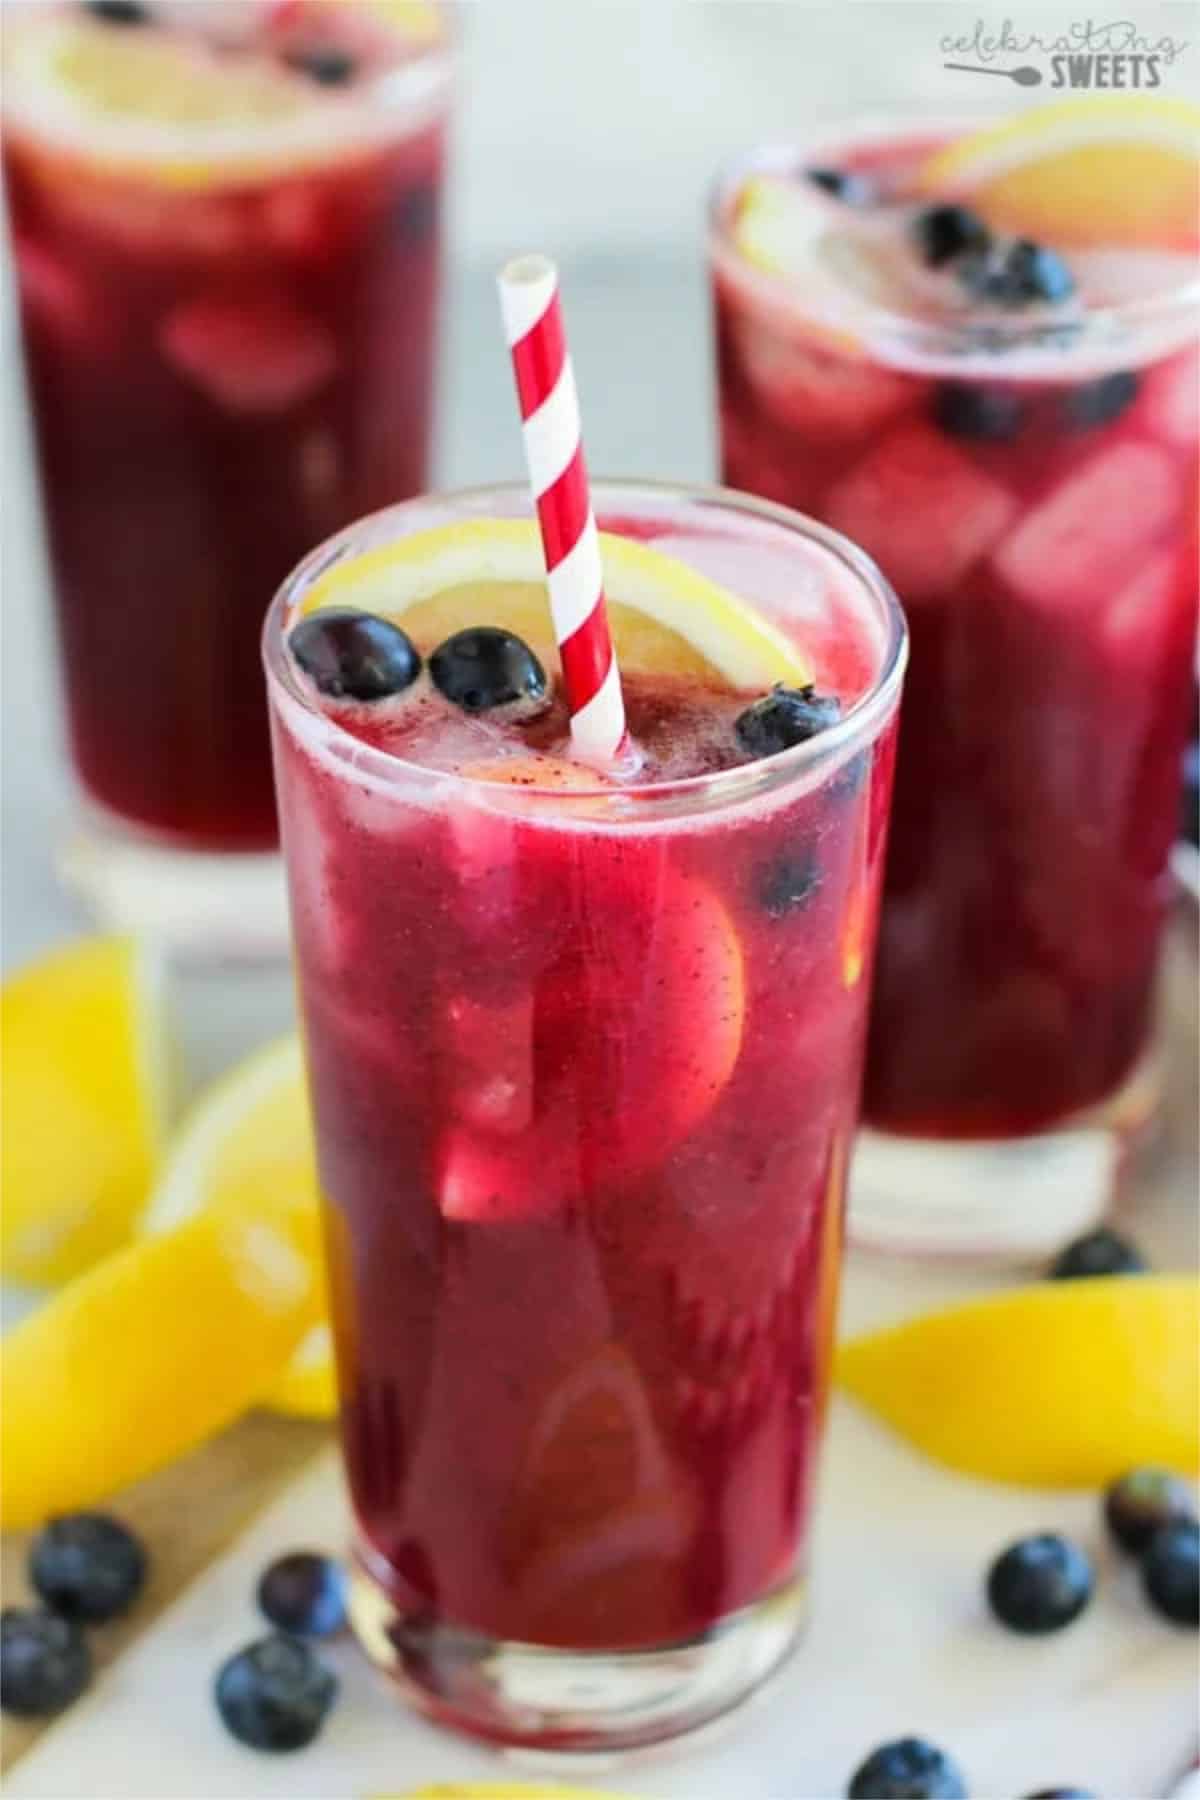 berry ade with blueberries and a straw.